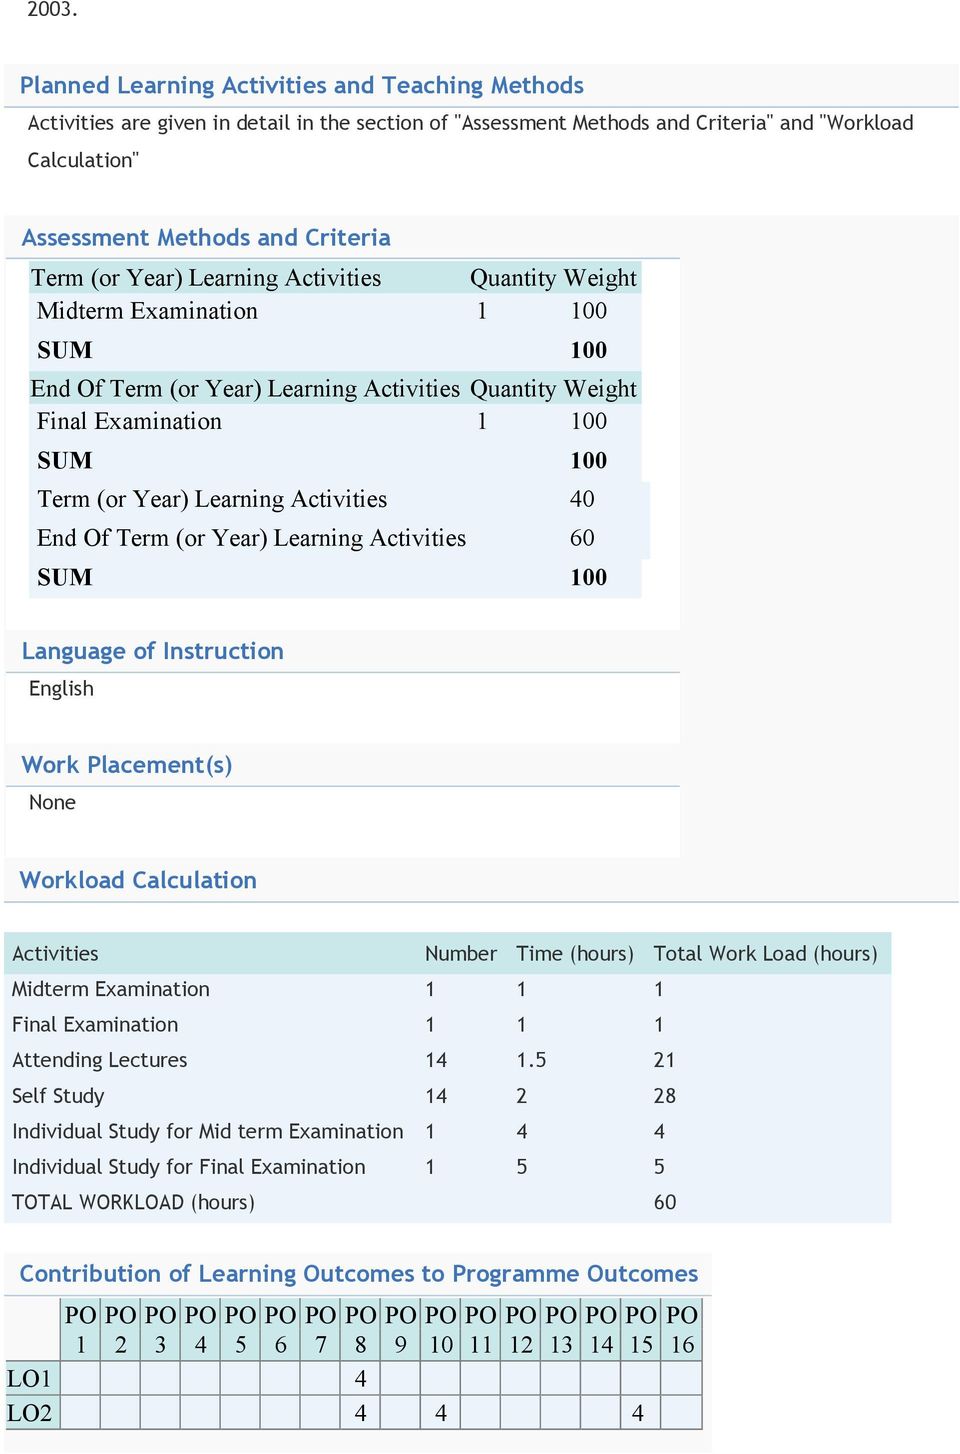 Activities 40 End Of Term (or Year) Learning Activities 60 SUM 100 Language of Instruction English Work Placement(s) None Workload Calculation Activities Number Time (hours) Total Work Load (hours)